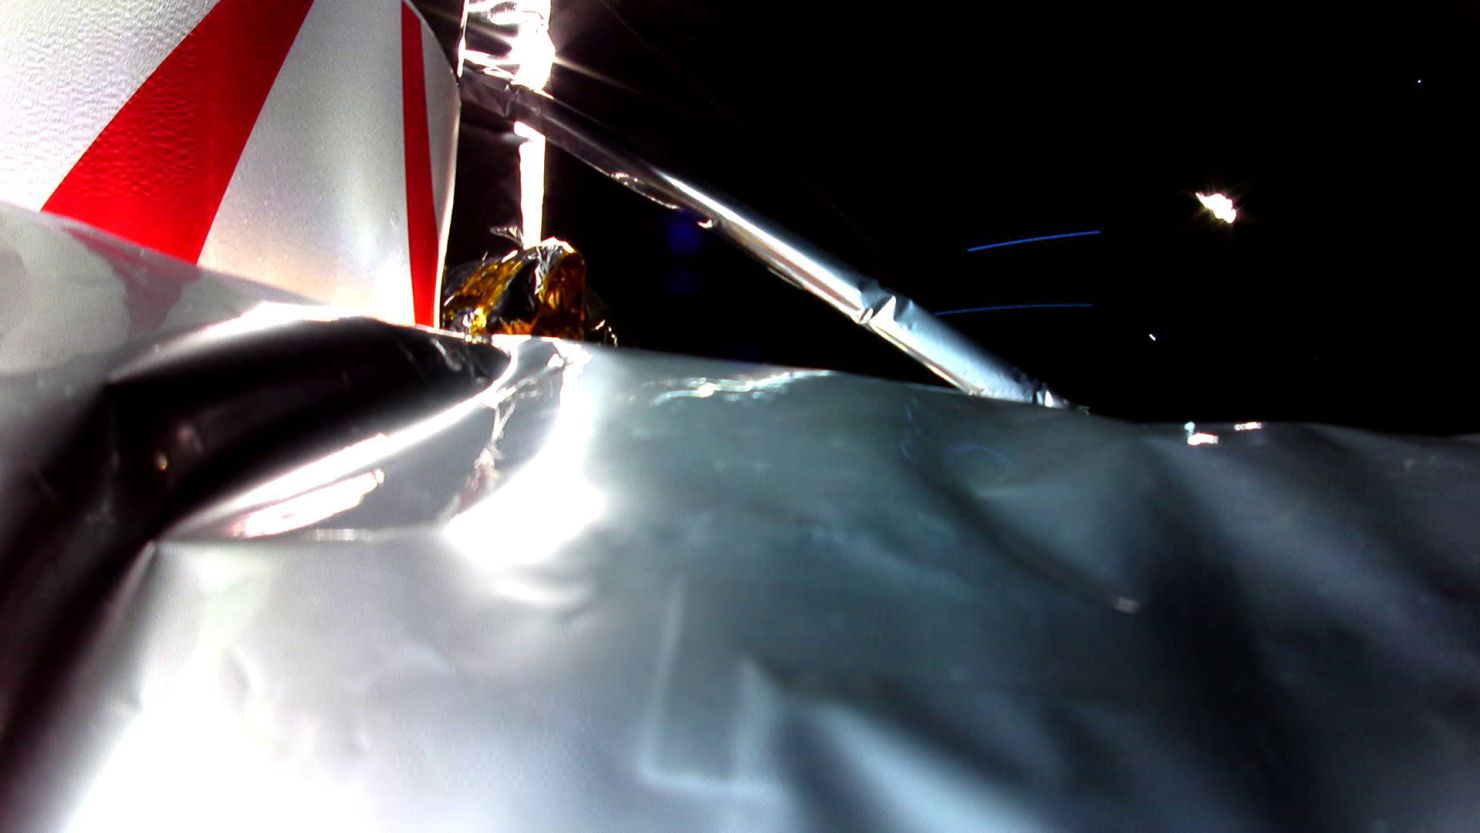 The Peregrine lunar lander captured this image using a camera mounted atop a payload deck. It shows Multi-Layer Insulation (MLI) in the foreground.